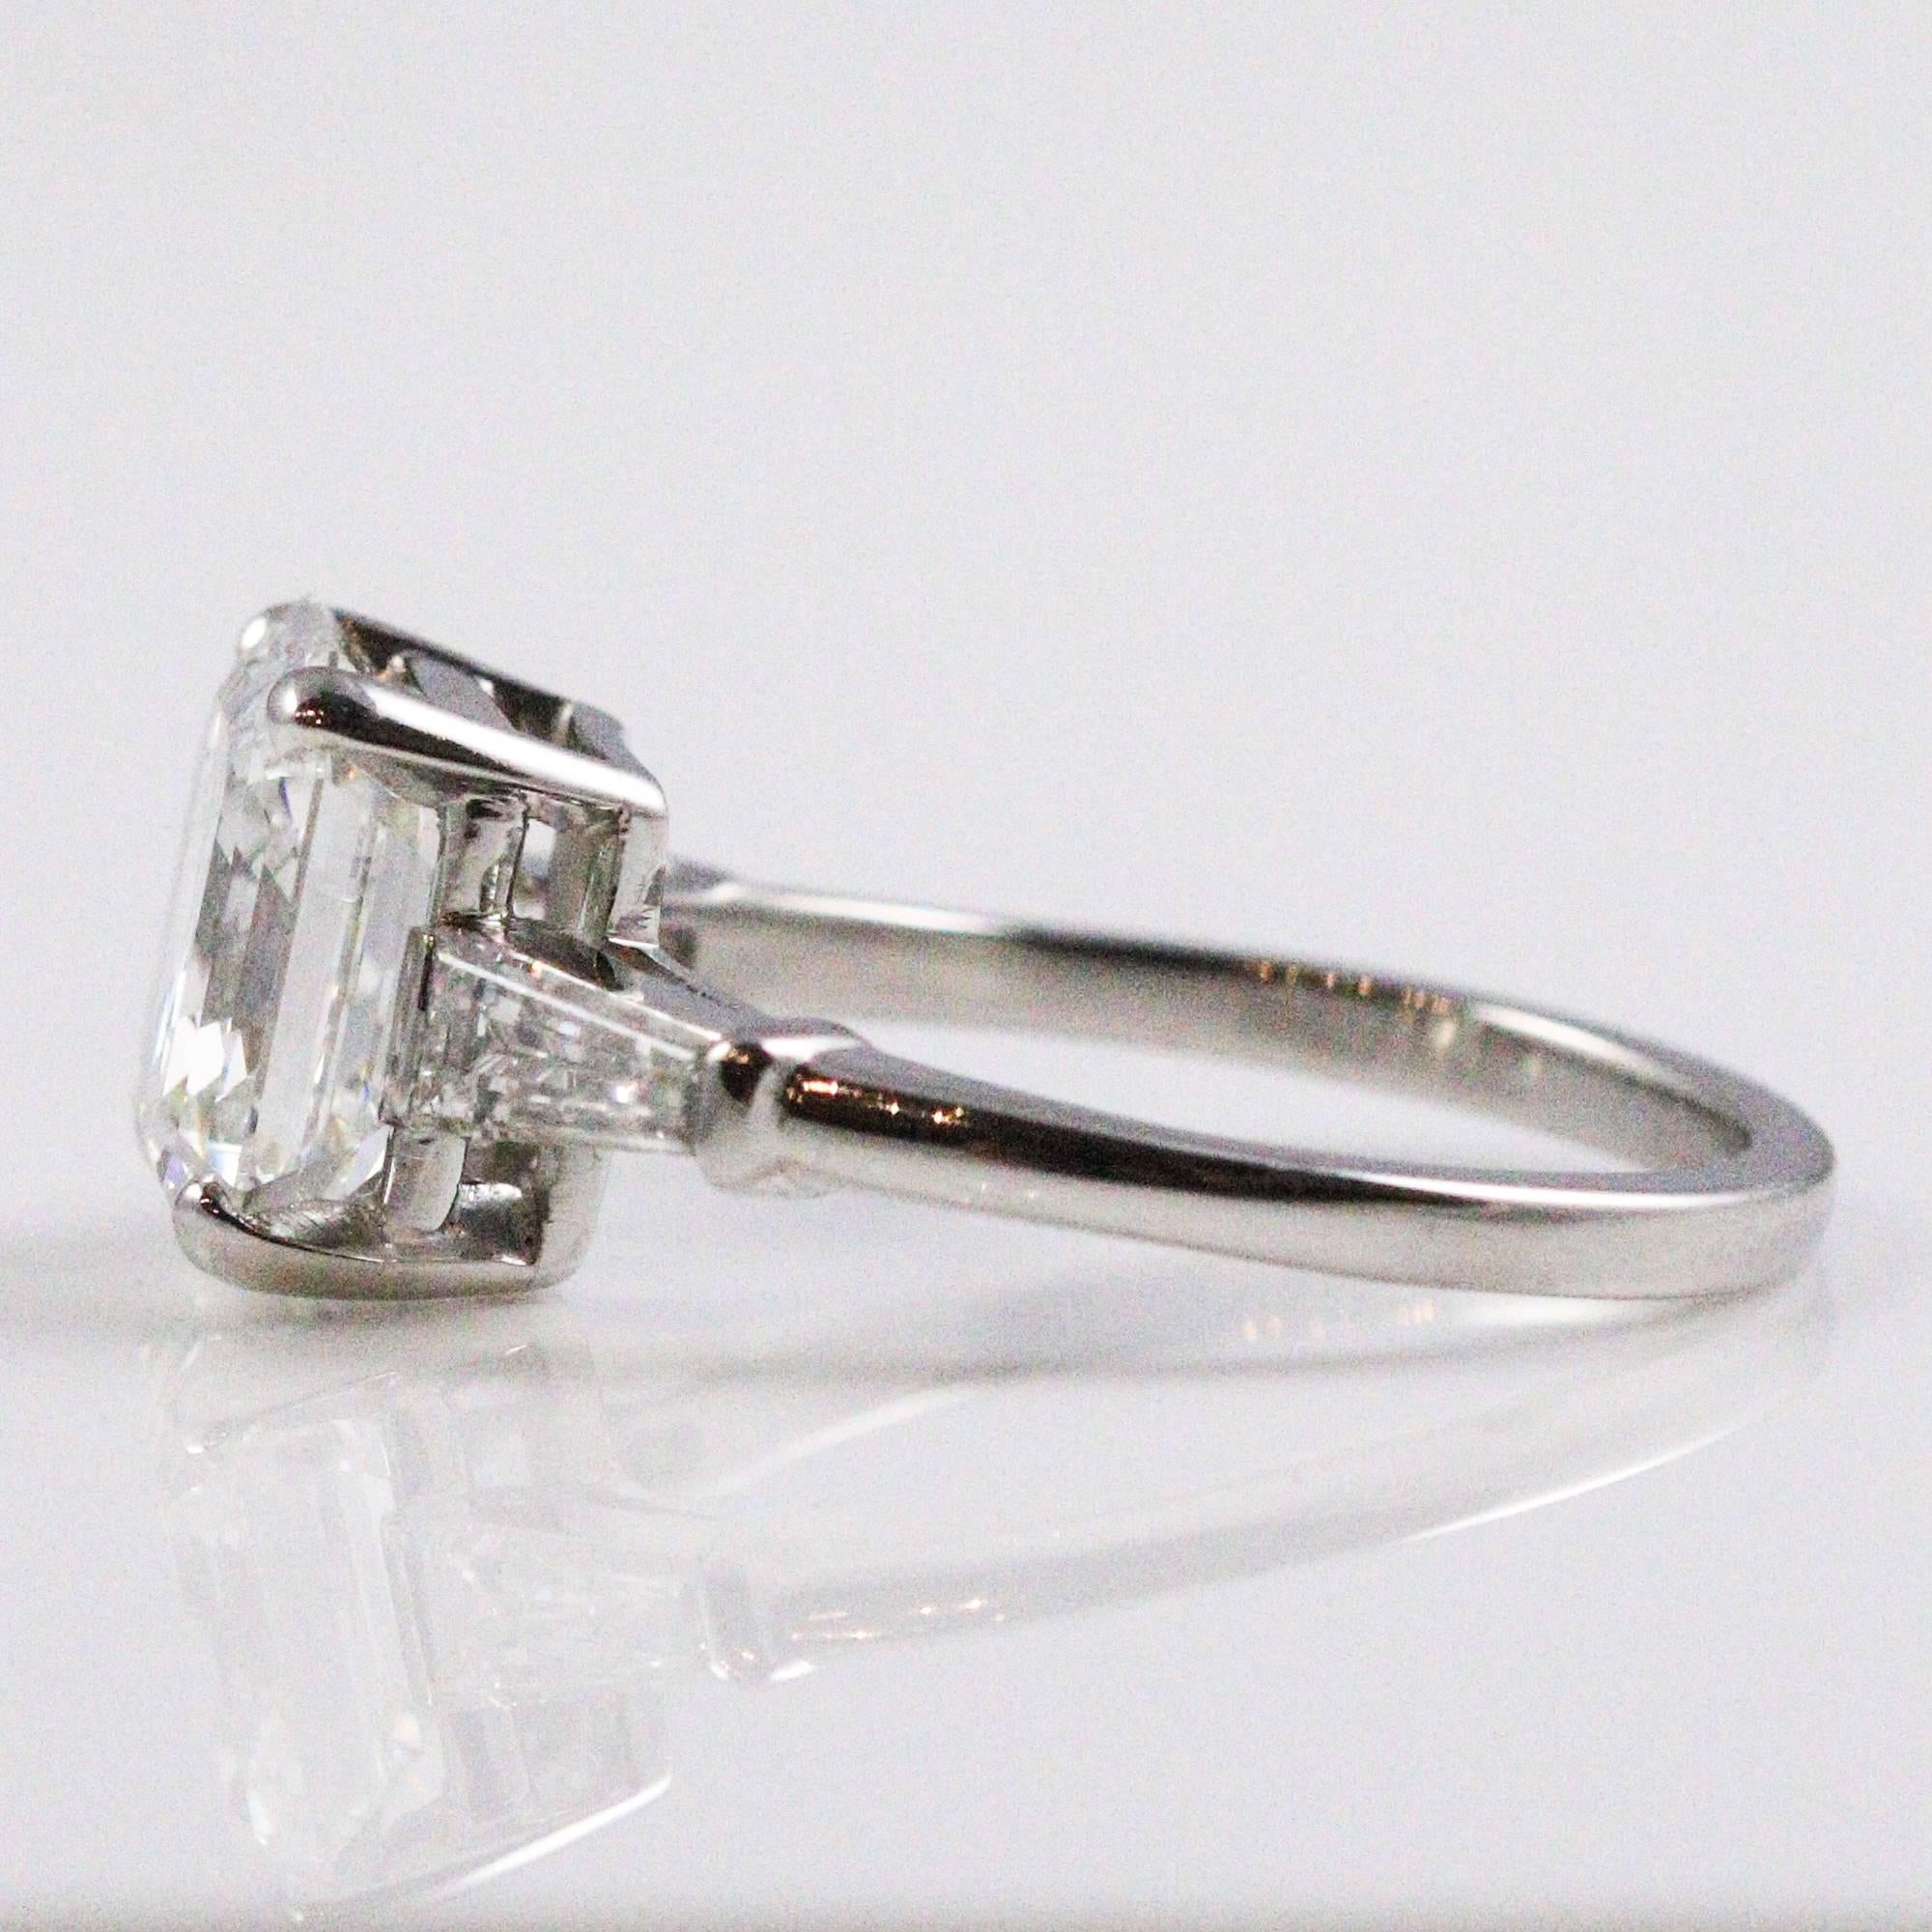 This breath taking ring features a squarish emerald cut diamond that slightly resembles an Asscher cut in appears. The stone measures 9.72 x 8.80 x 5.67mm, weighs 3.87ct and grades as 